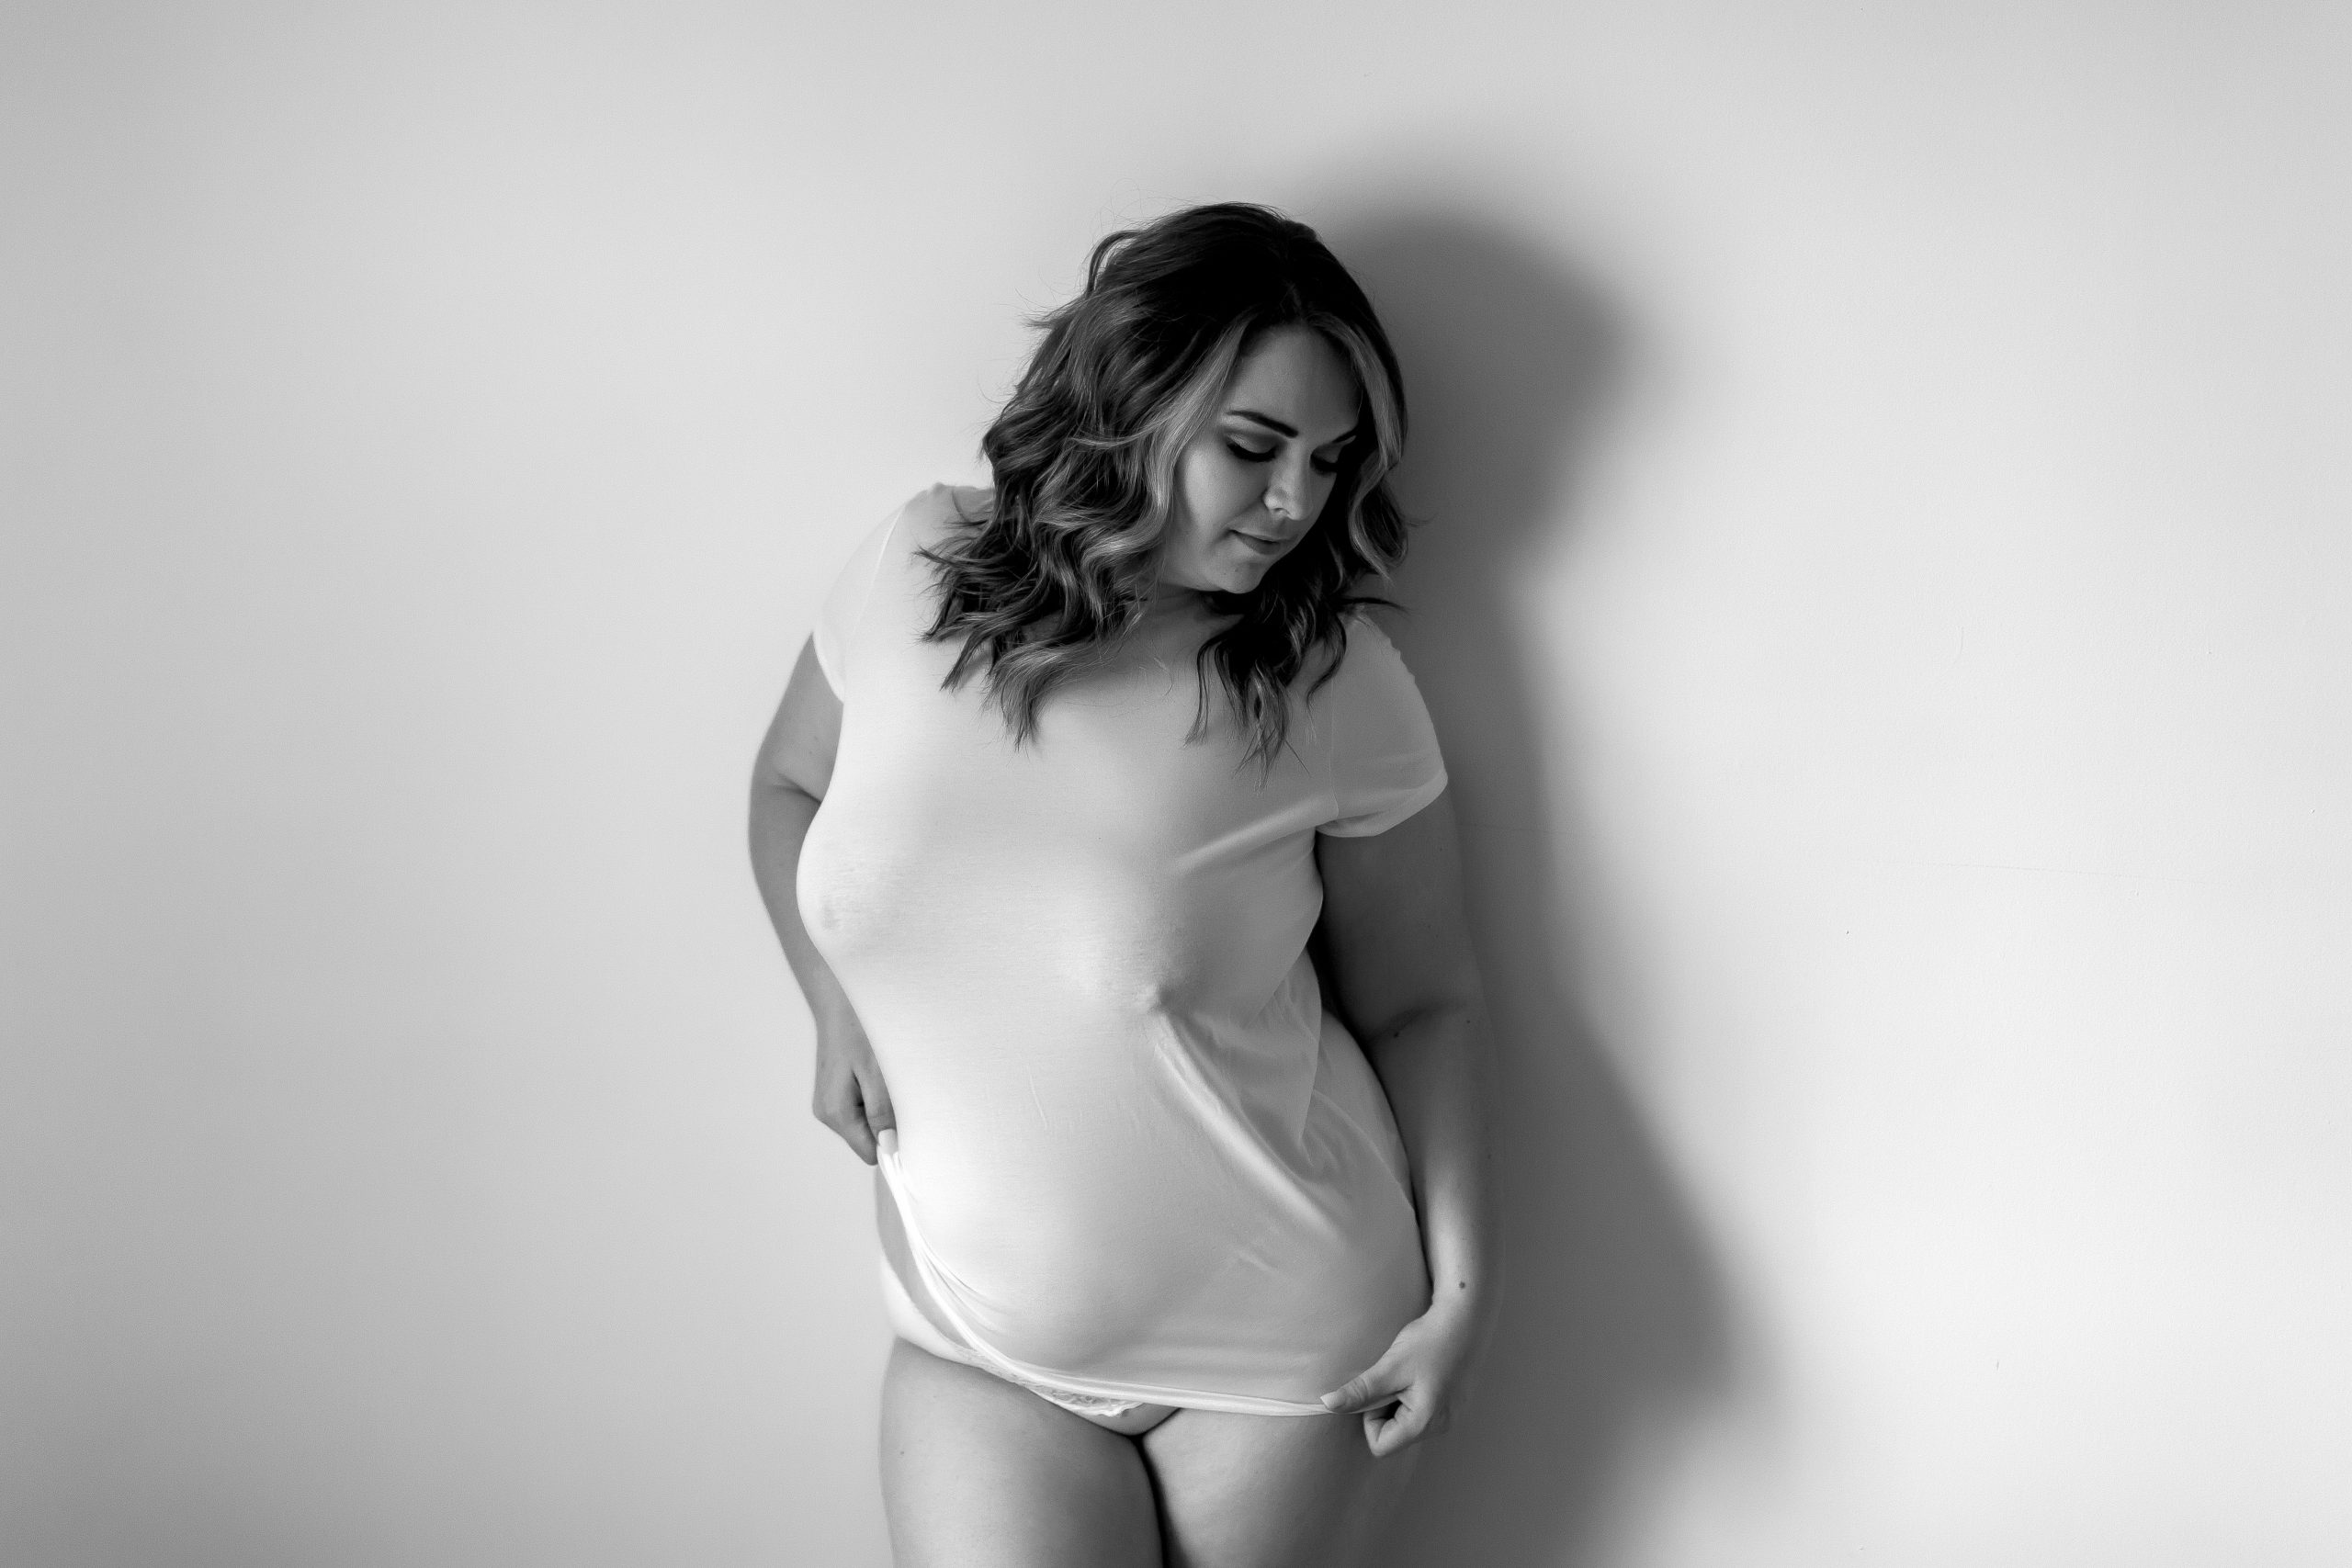 Black and White image of woman in a plain white tshirt, boudoir style